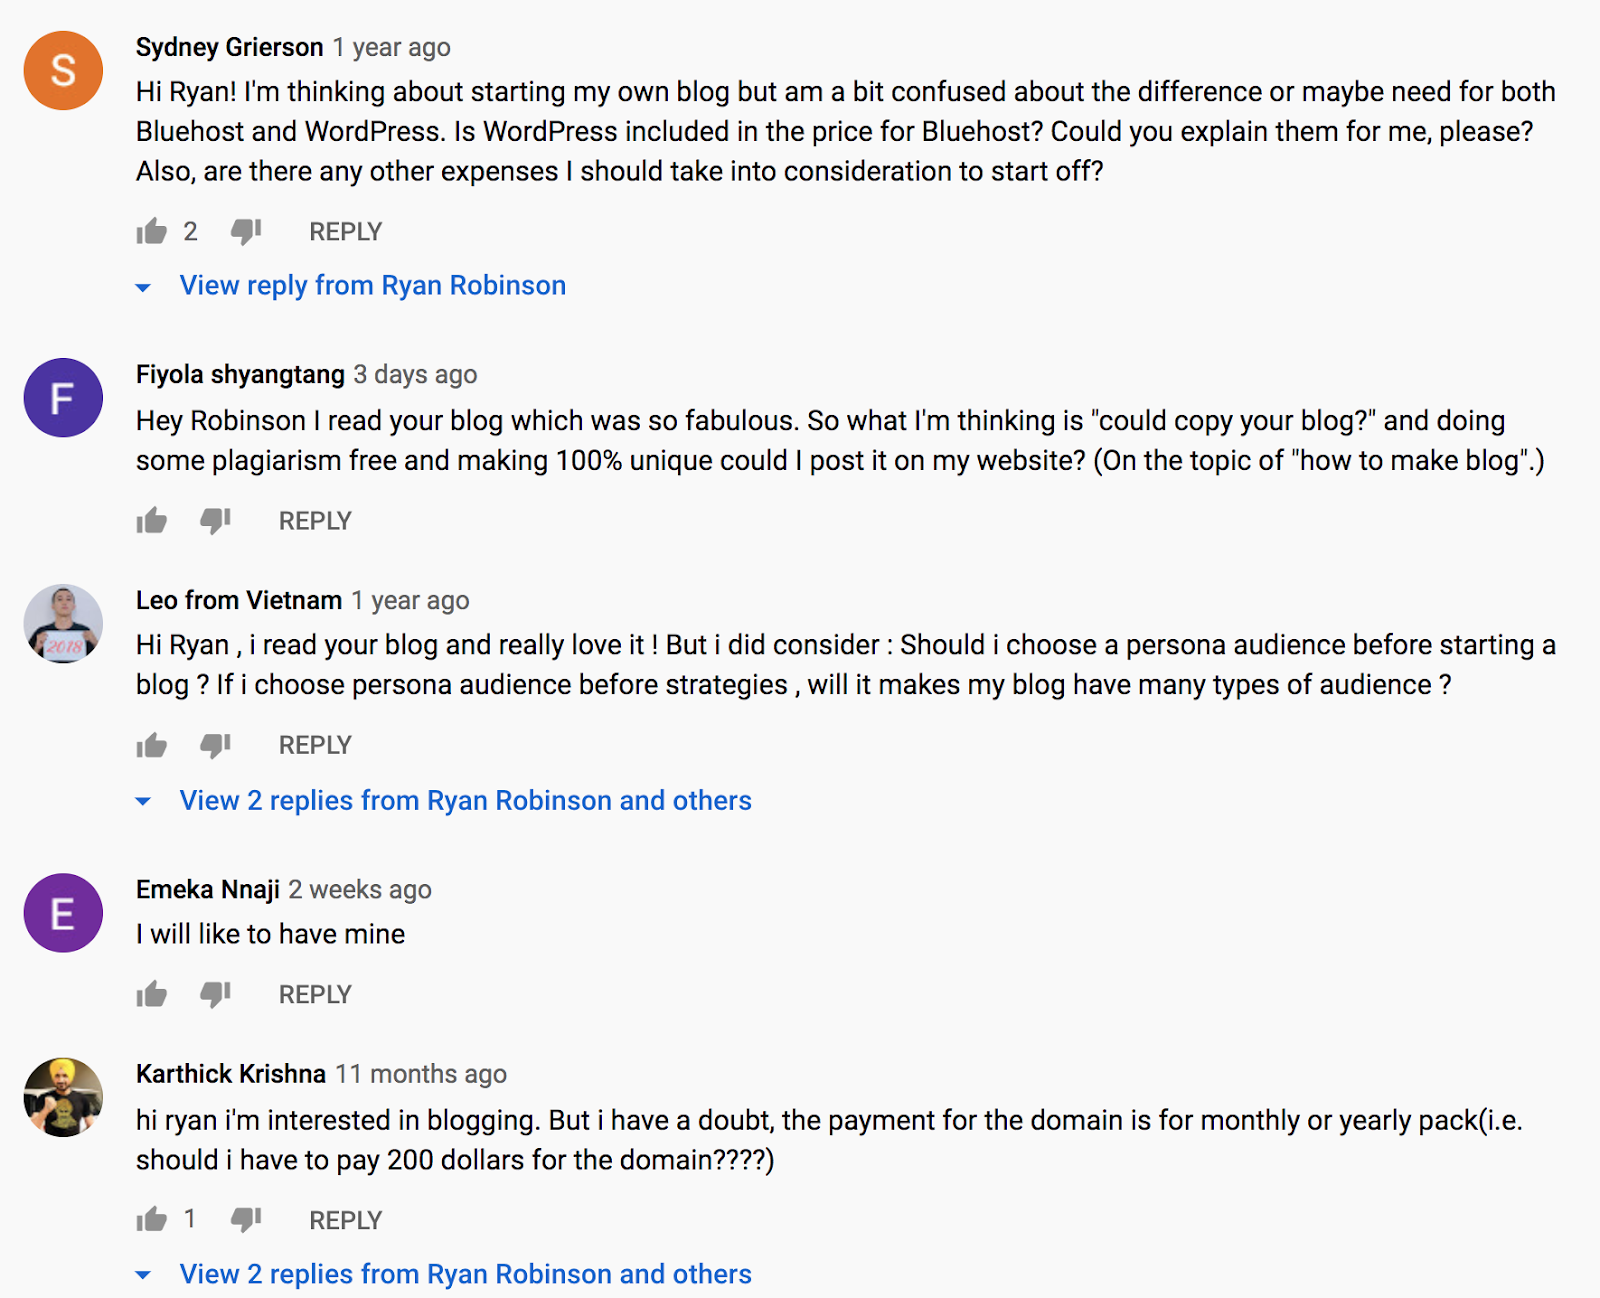 Screenshot of YouTube Comments Section (for Marketing Your Blog and Finding Your Audience)